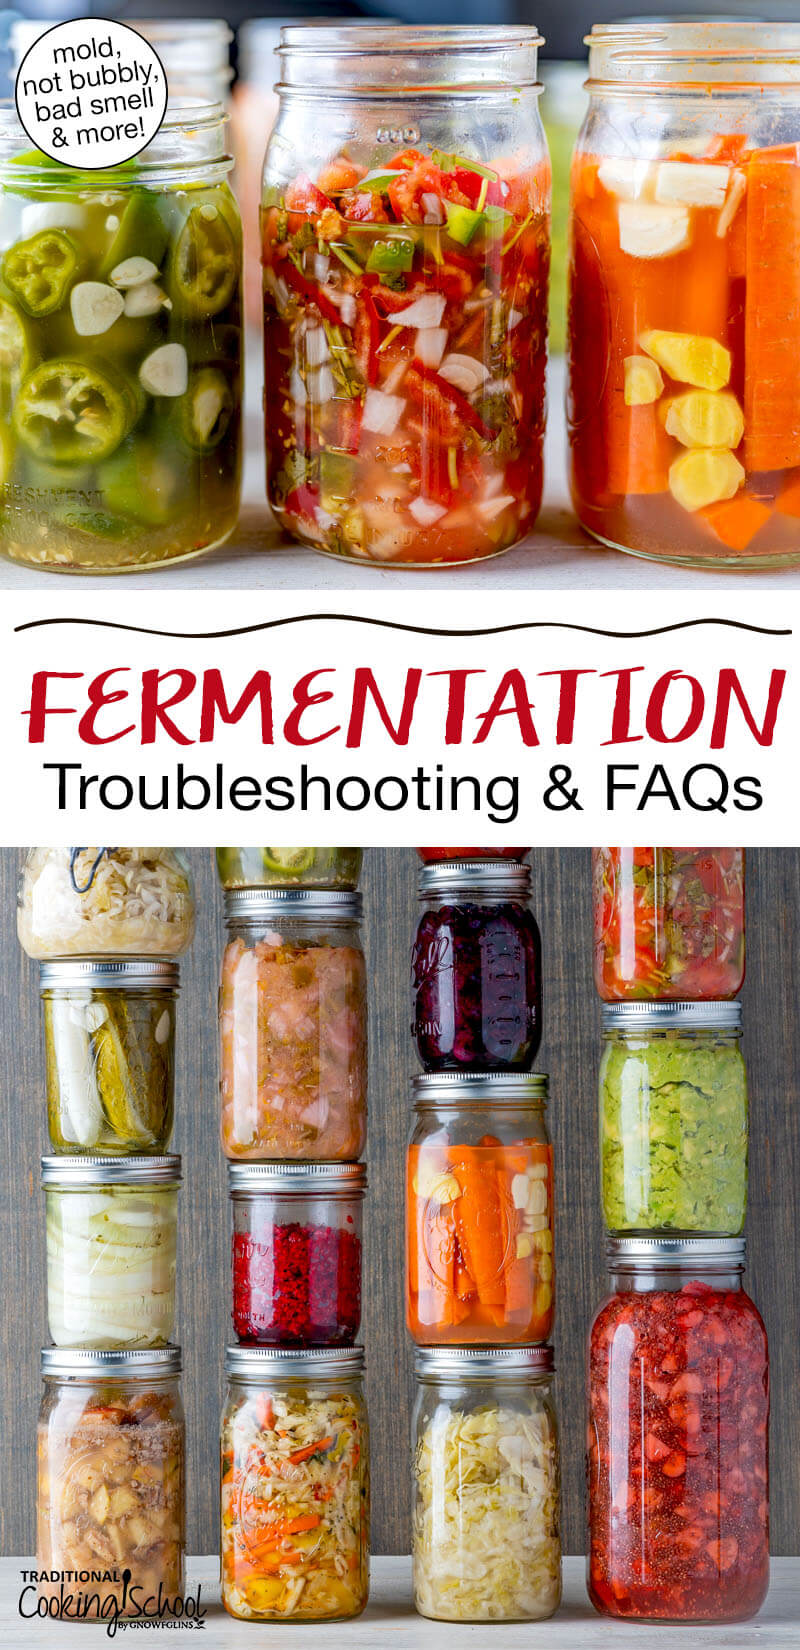 Photo collage of a wide variety of colorful ferments in glass jars. Text overlay says: "Fermentation Troubleshooting & FAQs (mold, not bubbly, bad smell & more!)"